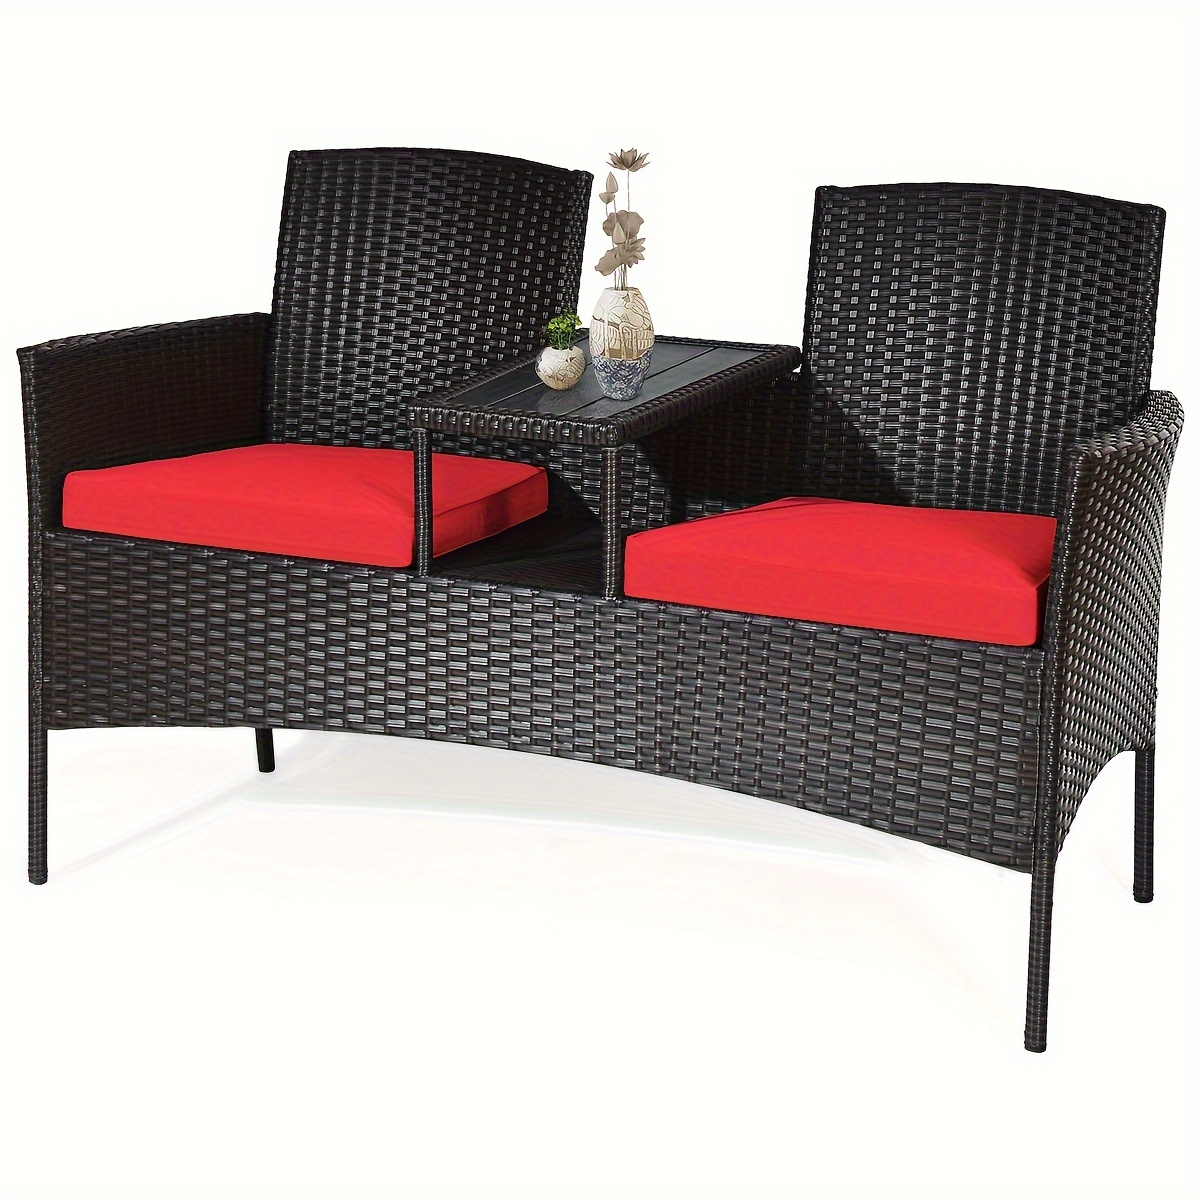 

1set Outdoor Patio Rattan Furniture Set, Loveseat Sofa With Red Cushions & Glass-top Coffee Table, Durable Wicker Design, 54.5-inch Wide, Perfect For Garden, Porch, Backyard